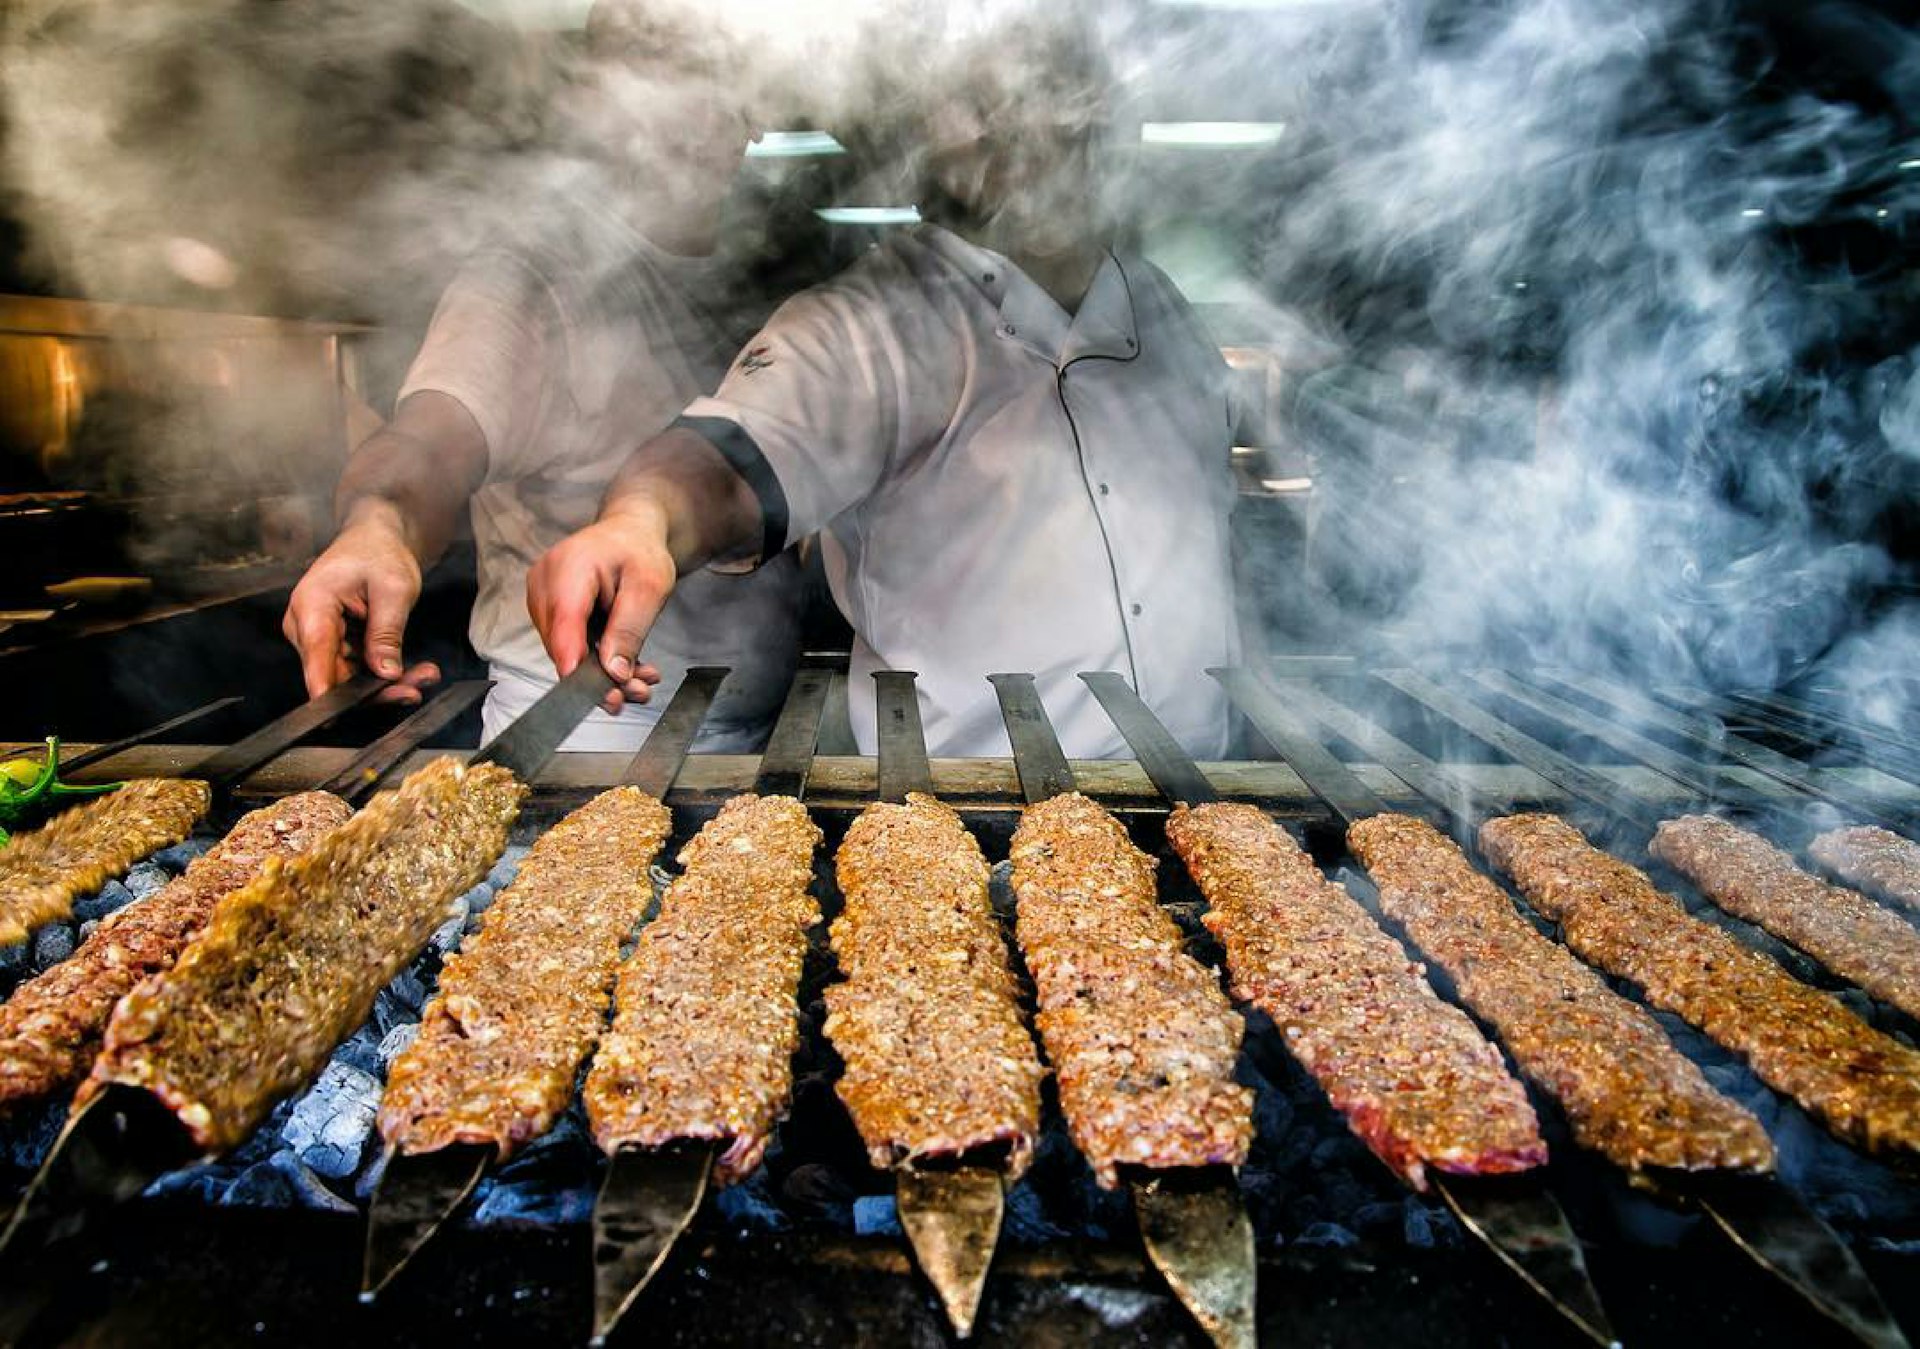 Skewers of meat on a grill in Istanbul, Turkey